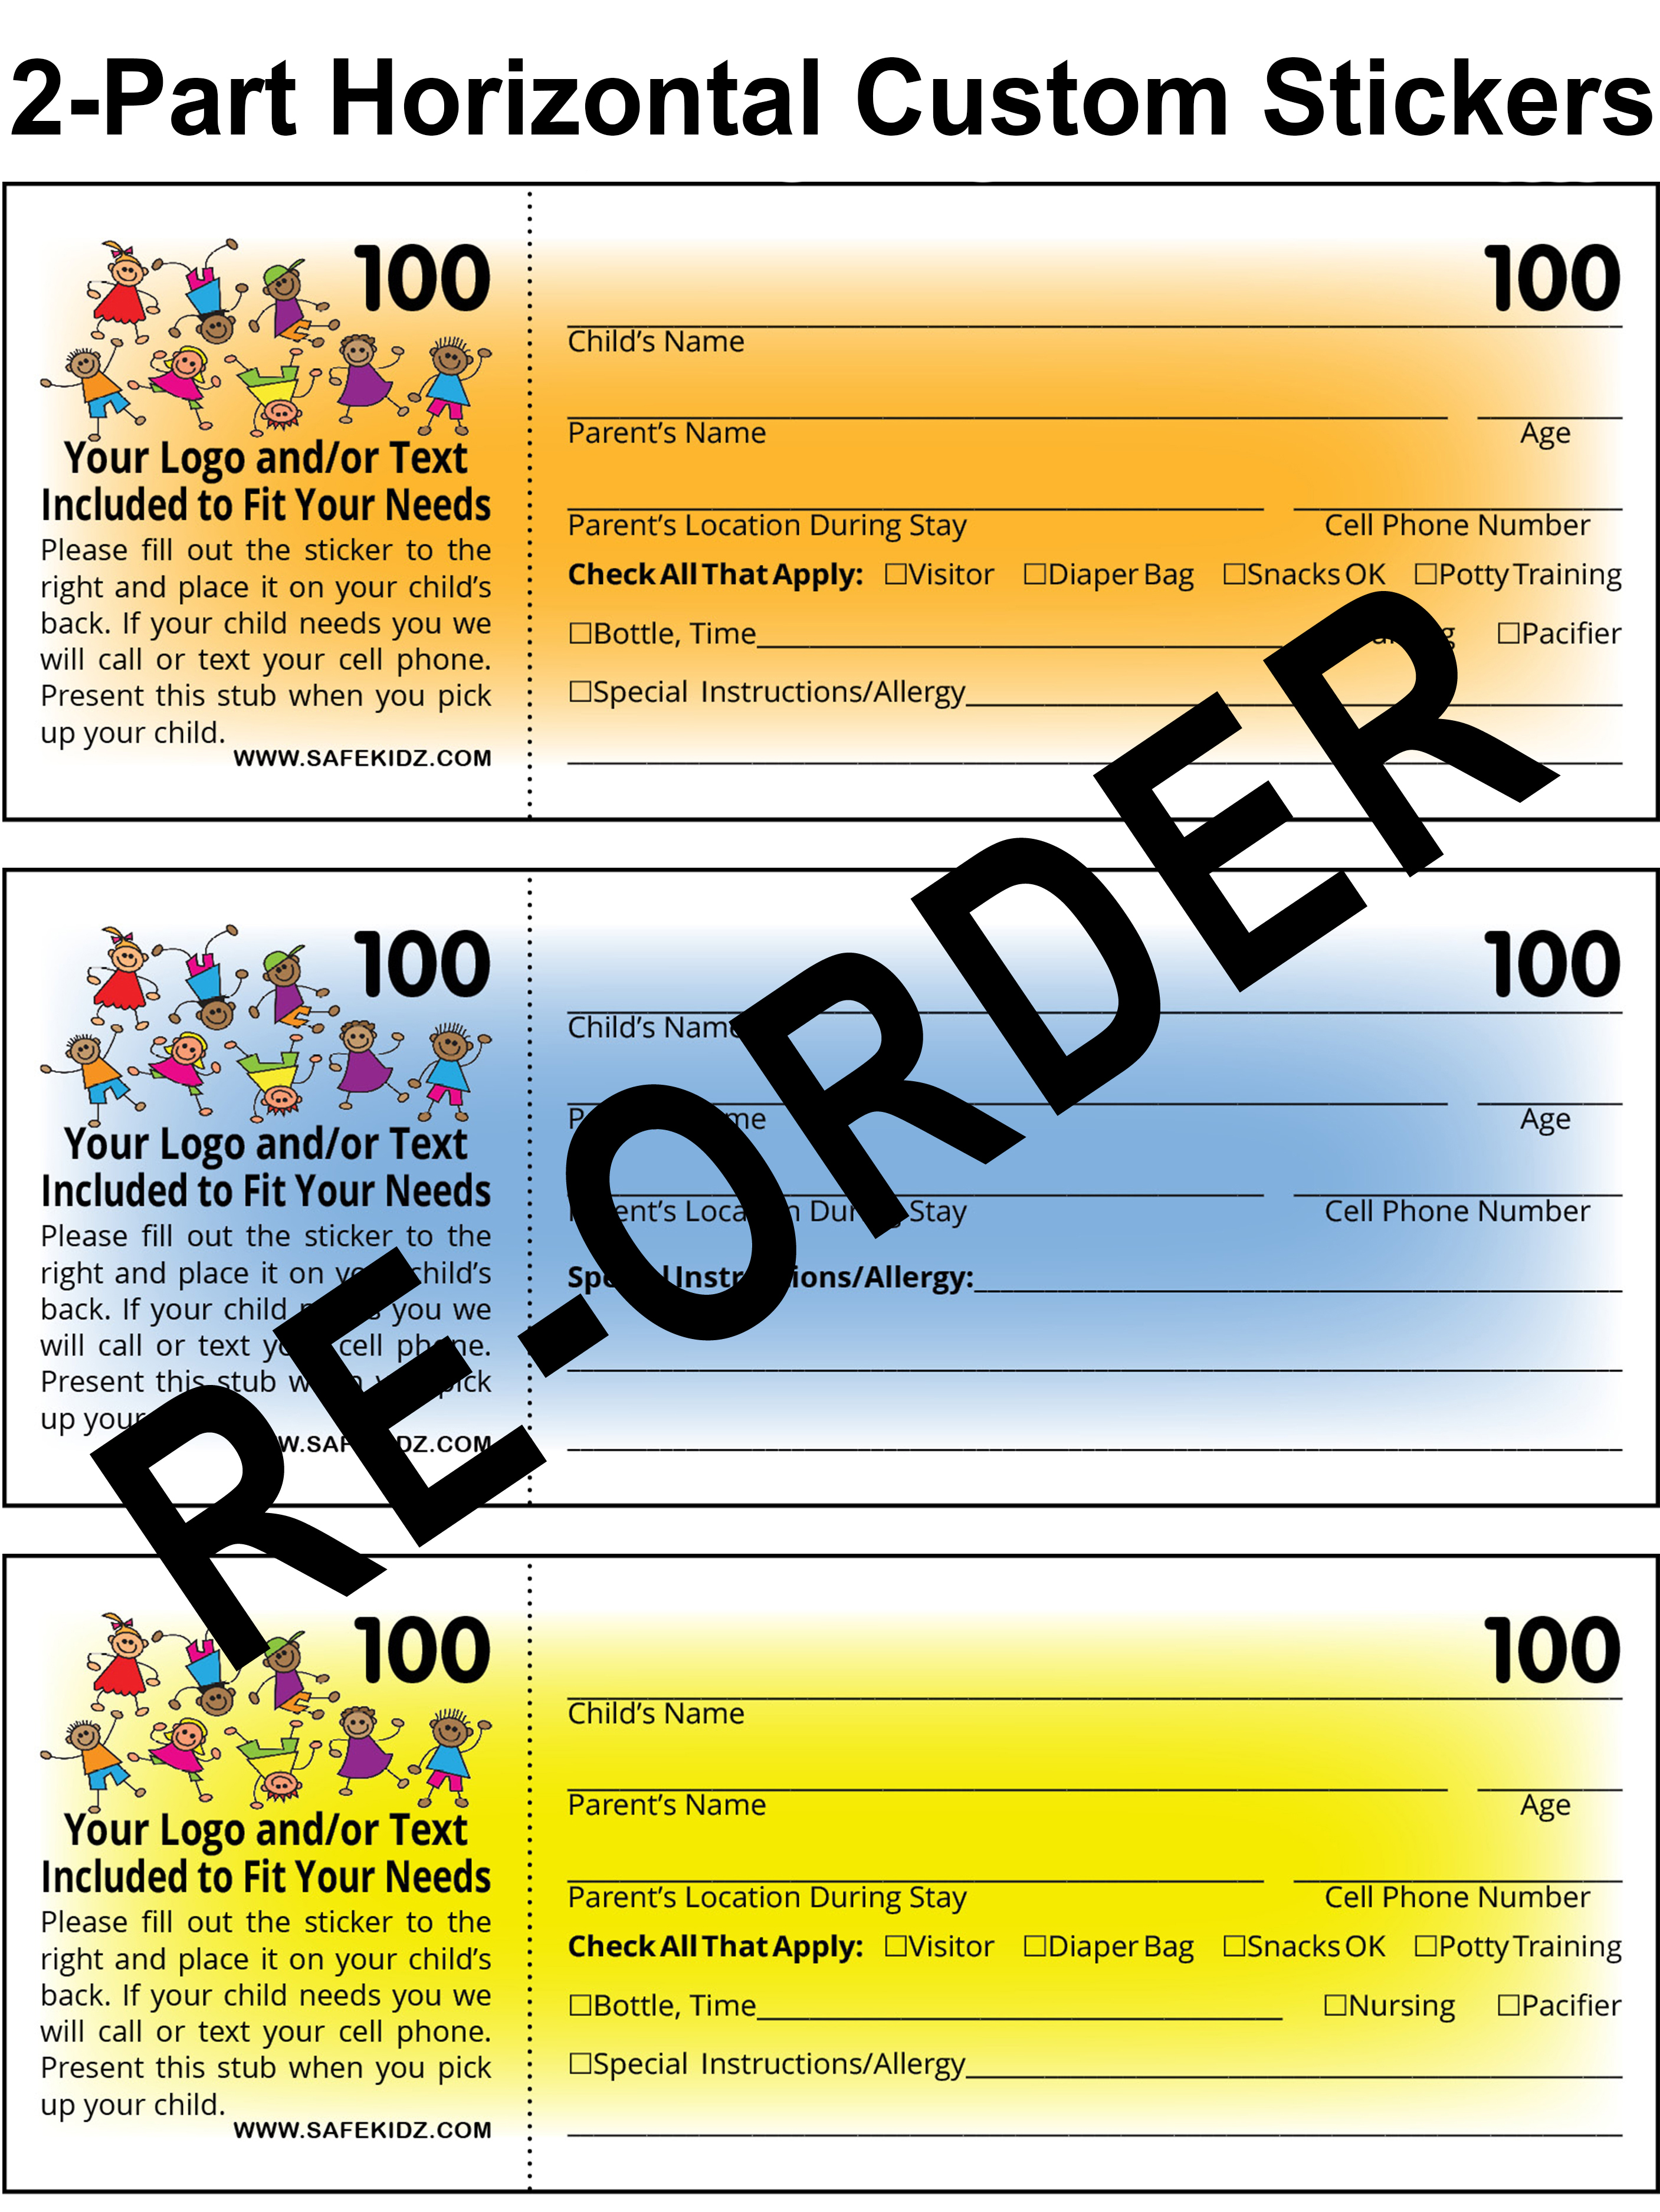 Re-Order Horizontal 27-Part Check-In & Security Stickers - Box of